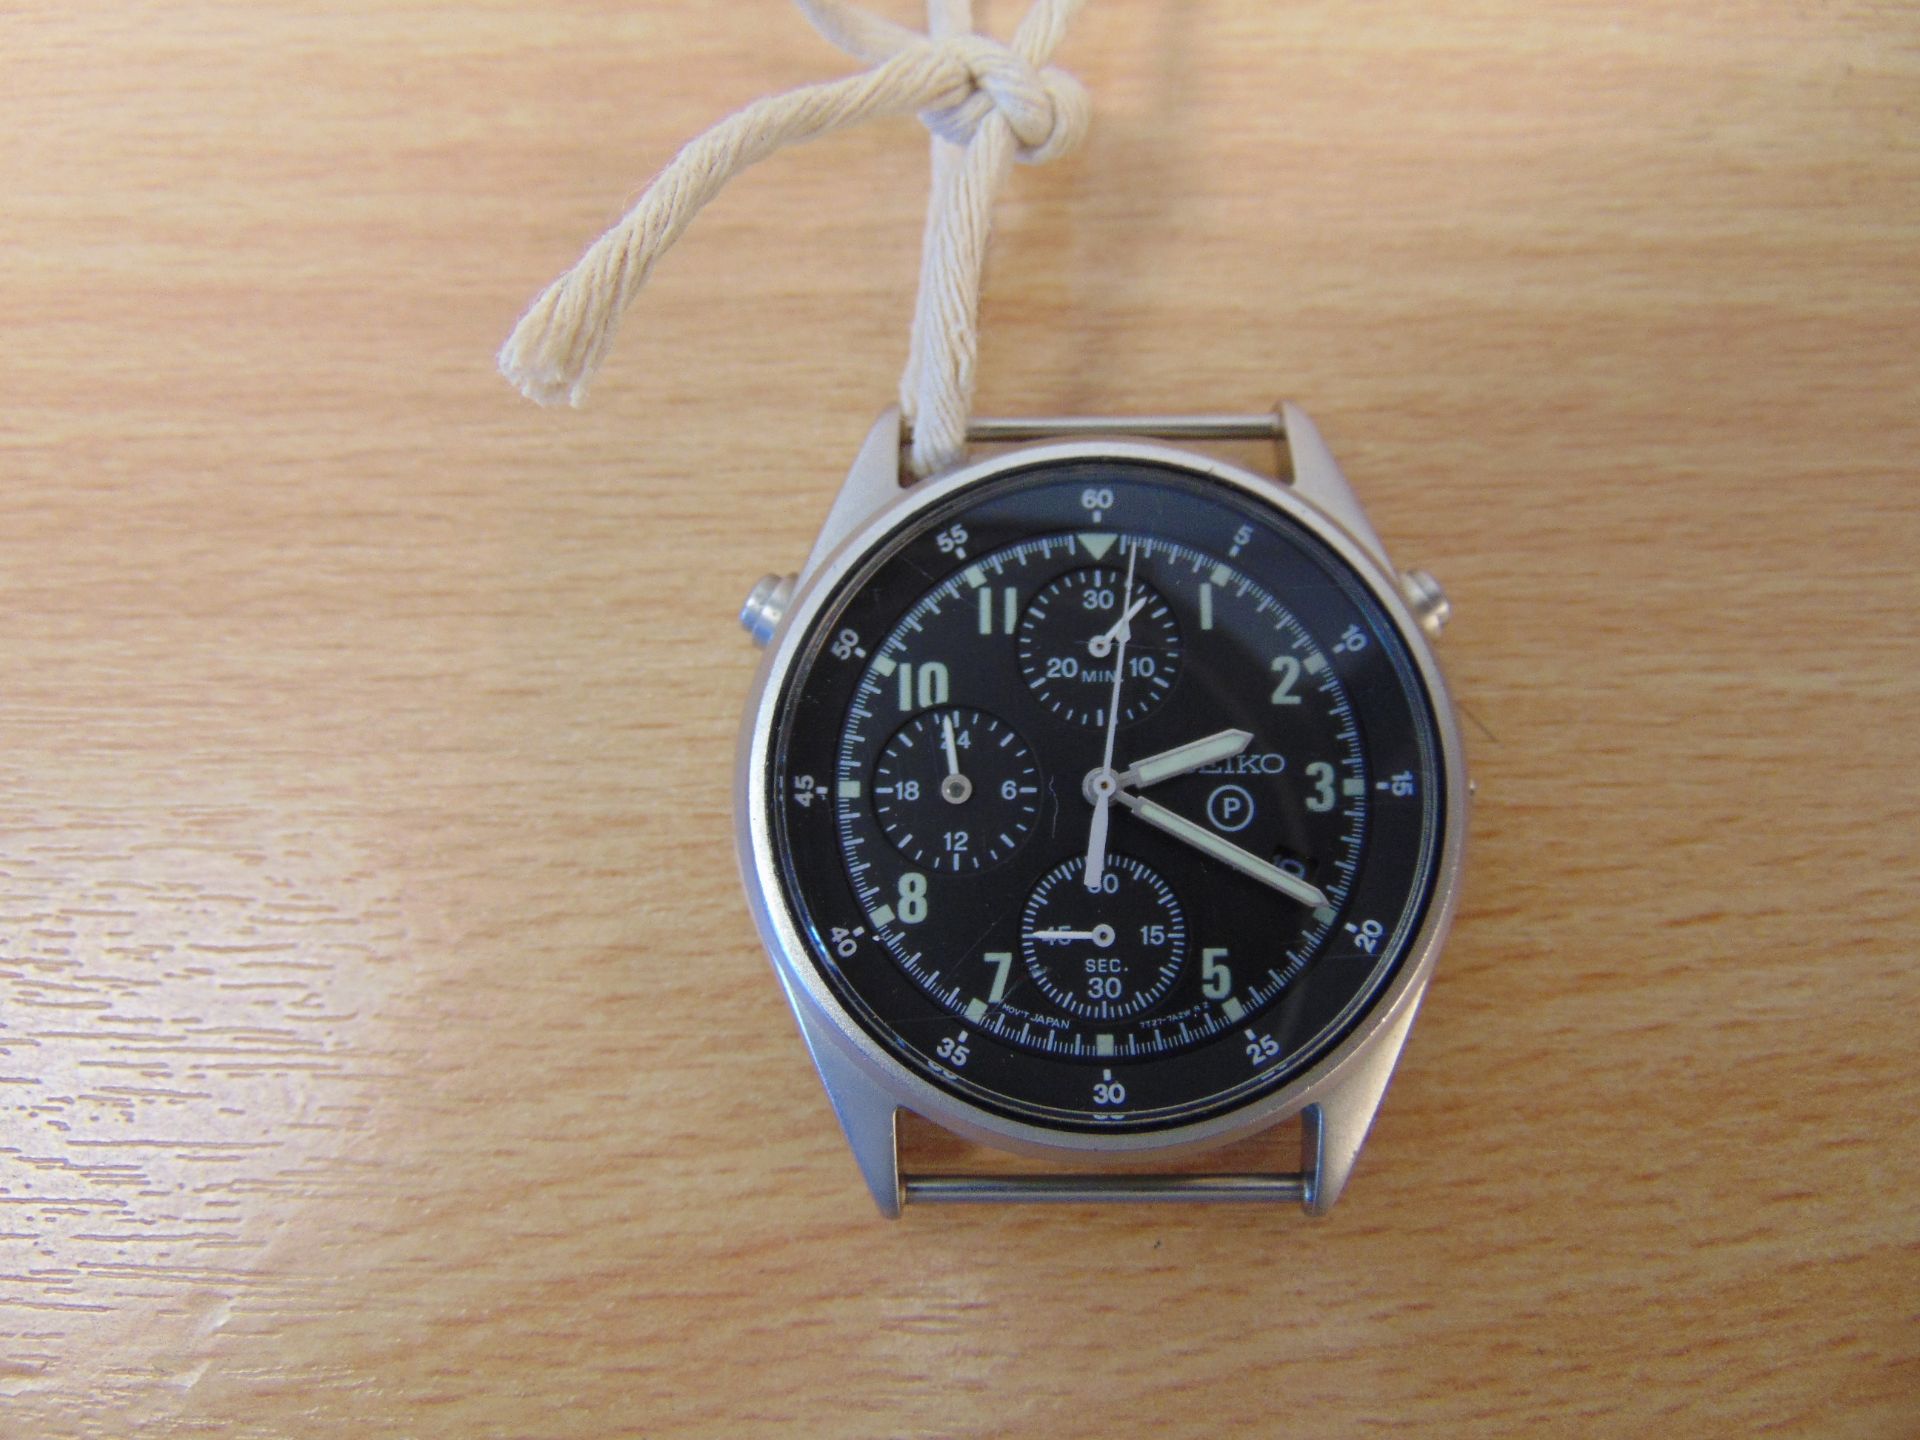 Seiko Gen 2 RAF Pilots Chrono Tornado Force issue, Nato Marks Date 1999, Winder missing - Image 2 of 5